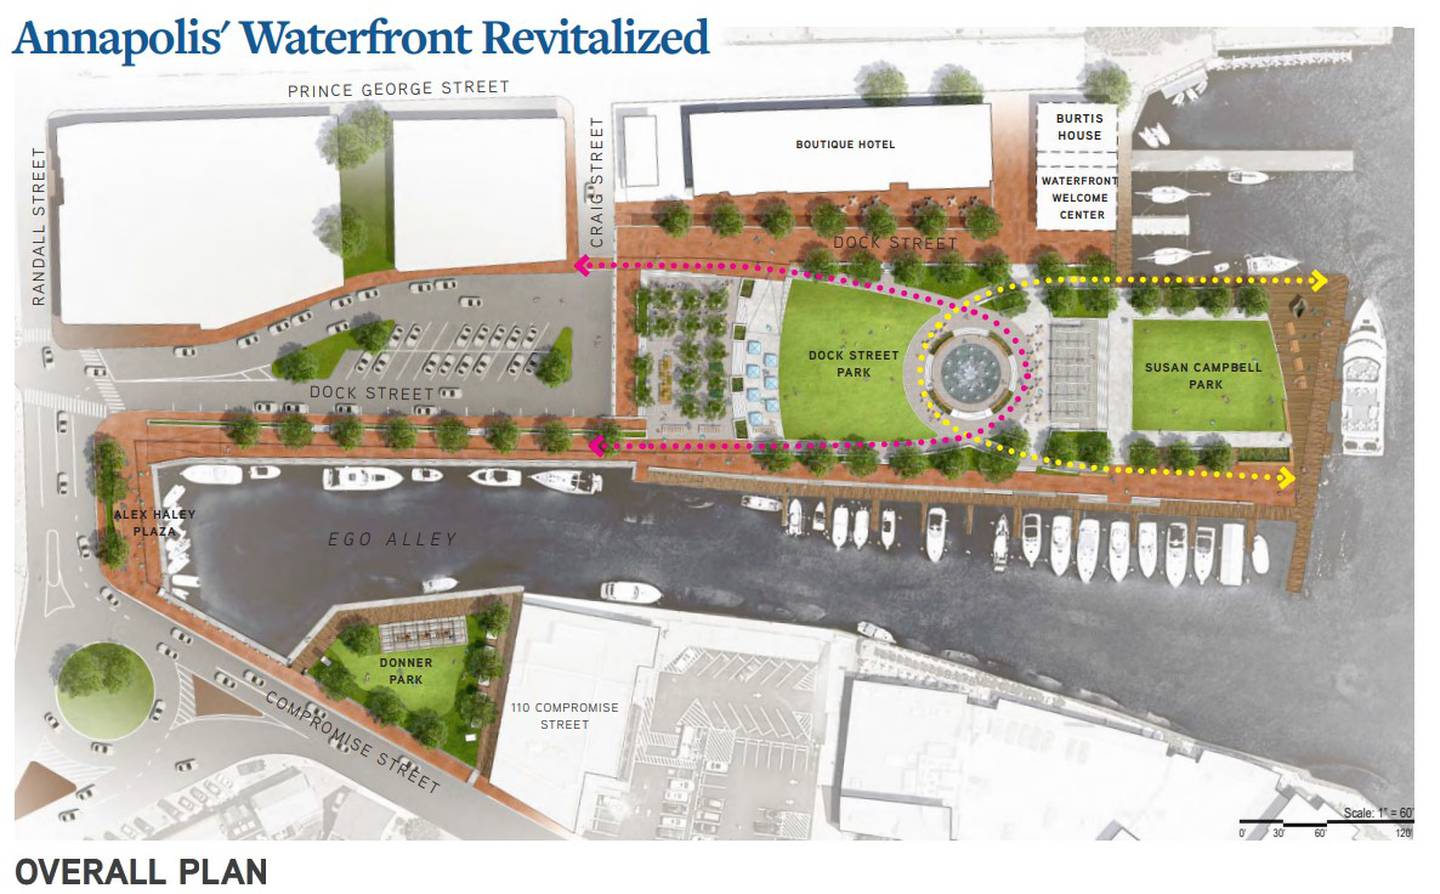 Annapolis is starting the next phase of its remake of City Dock, which will convert parking areas to parks.